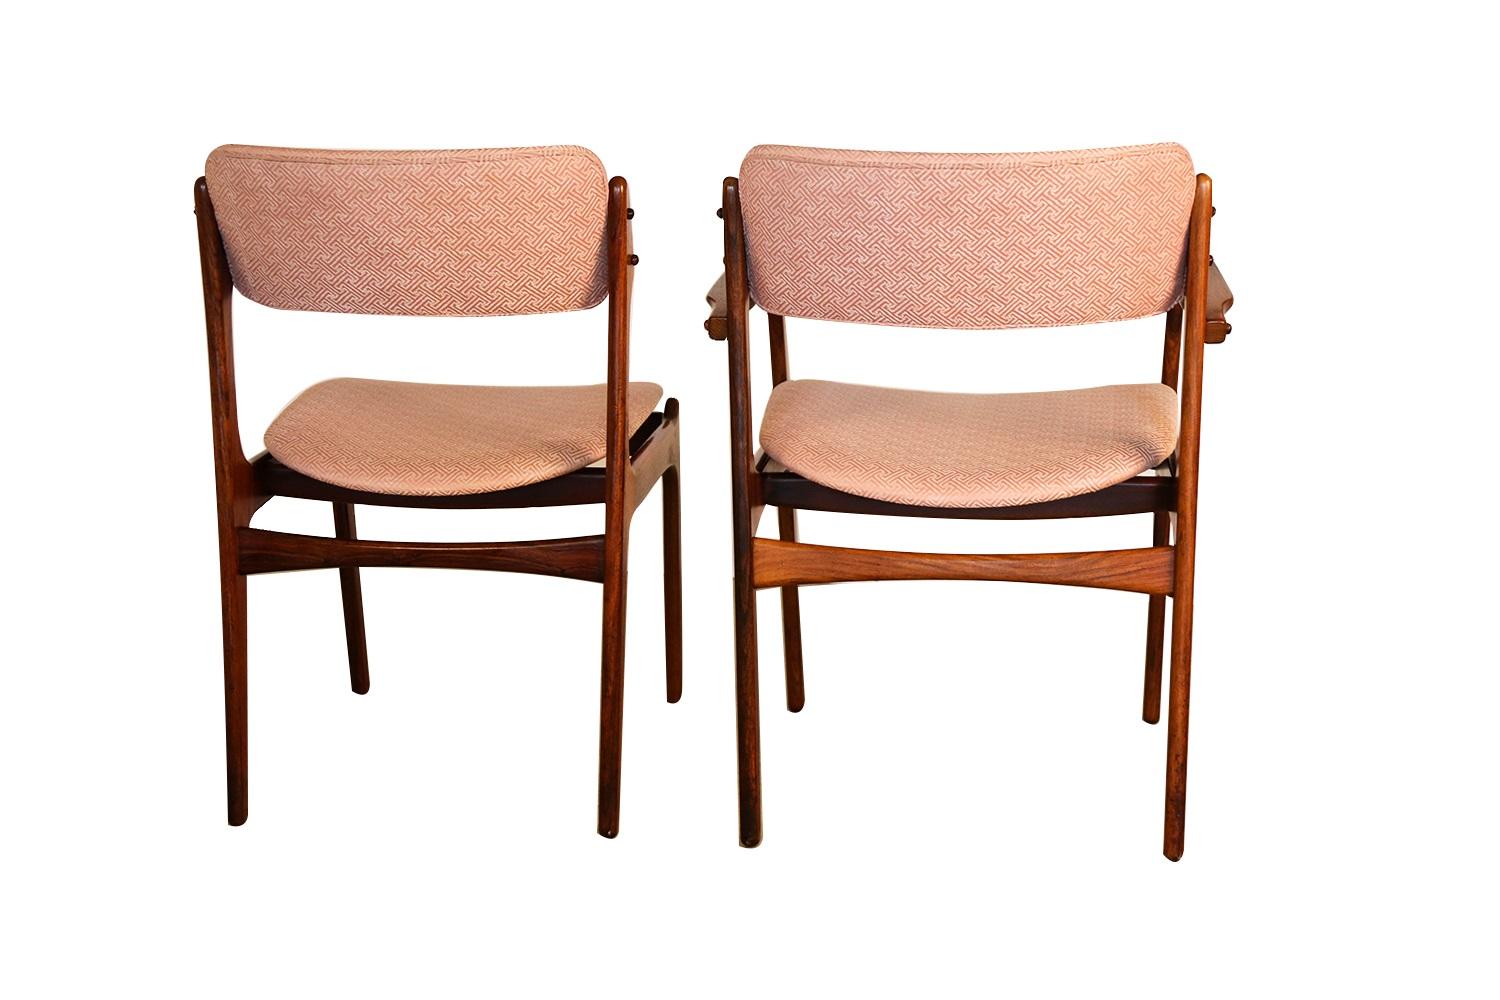 Midcentury Erik Buch for Oddense Maskinsnedkeri A/S Rosewood Dining Chairs 3